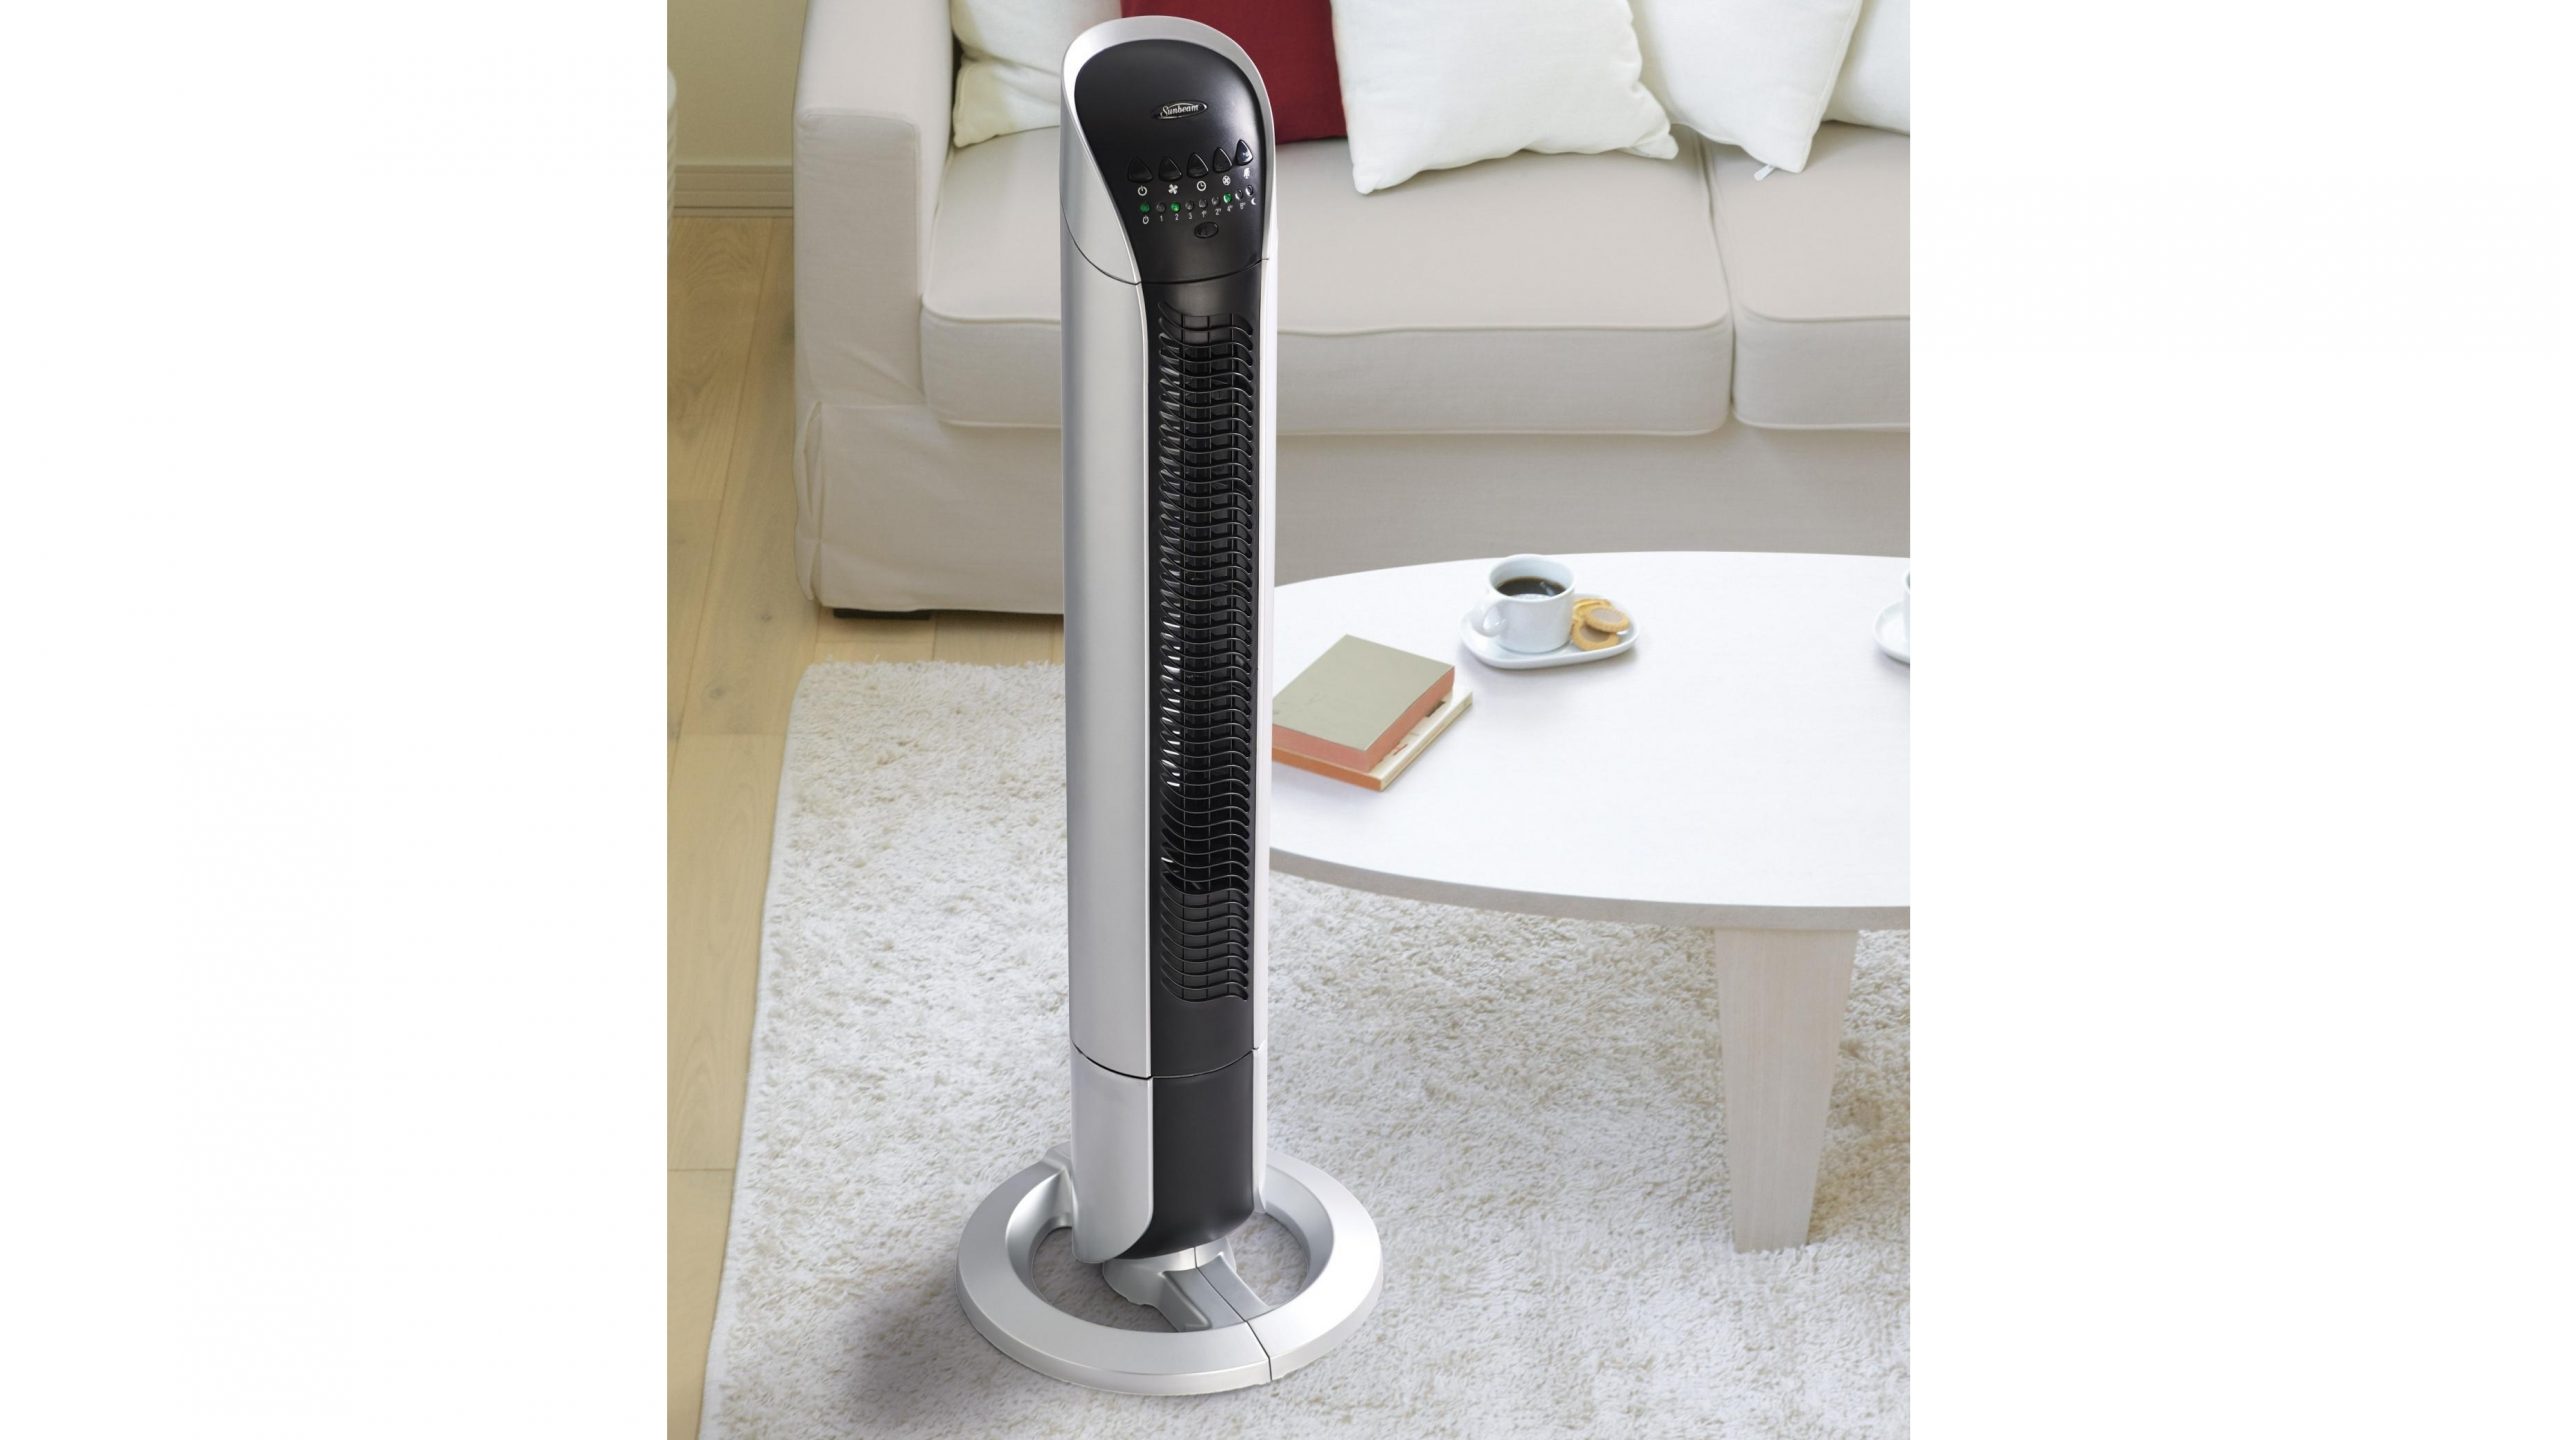 Sunbeam Fa7250 Tower Fan With Night Mode with regard to dimensions 3707 X 2085